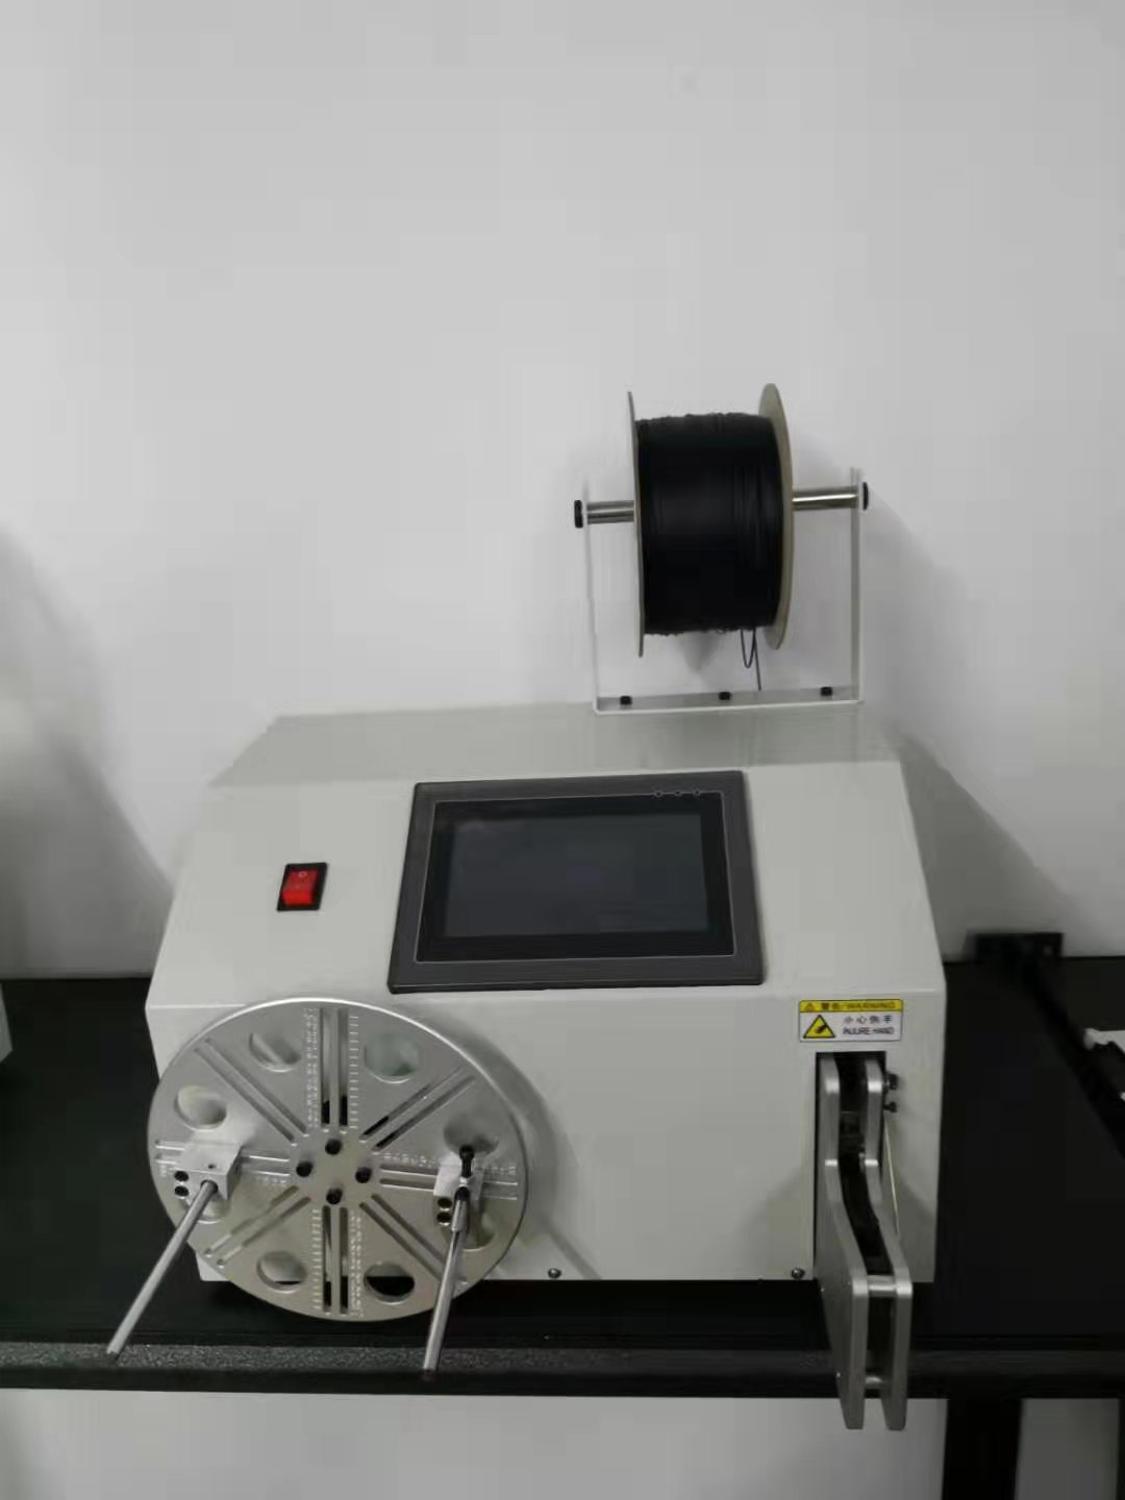 LN40-80 Automatic Coil winding binding machine with touch screen Compatible